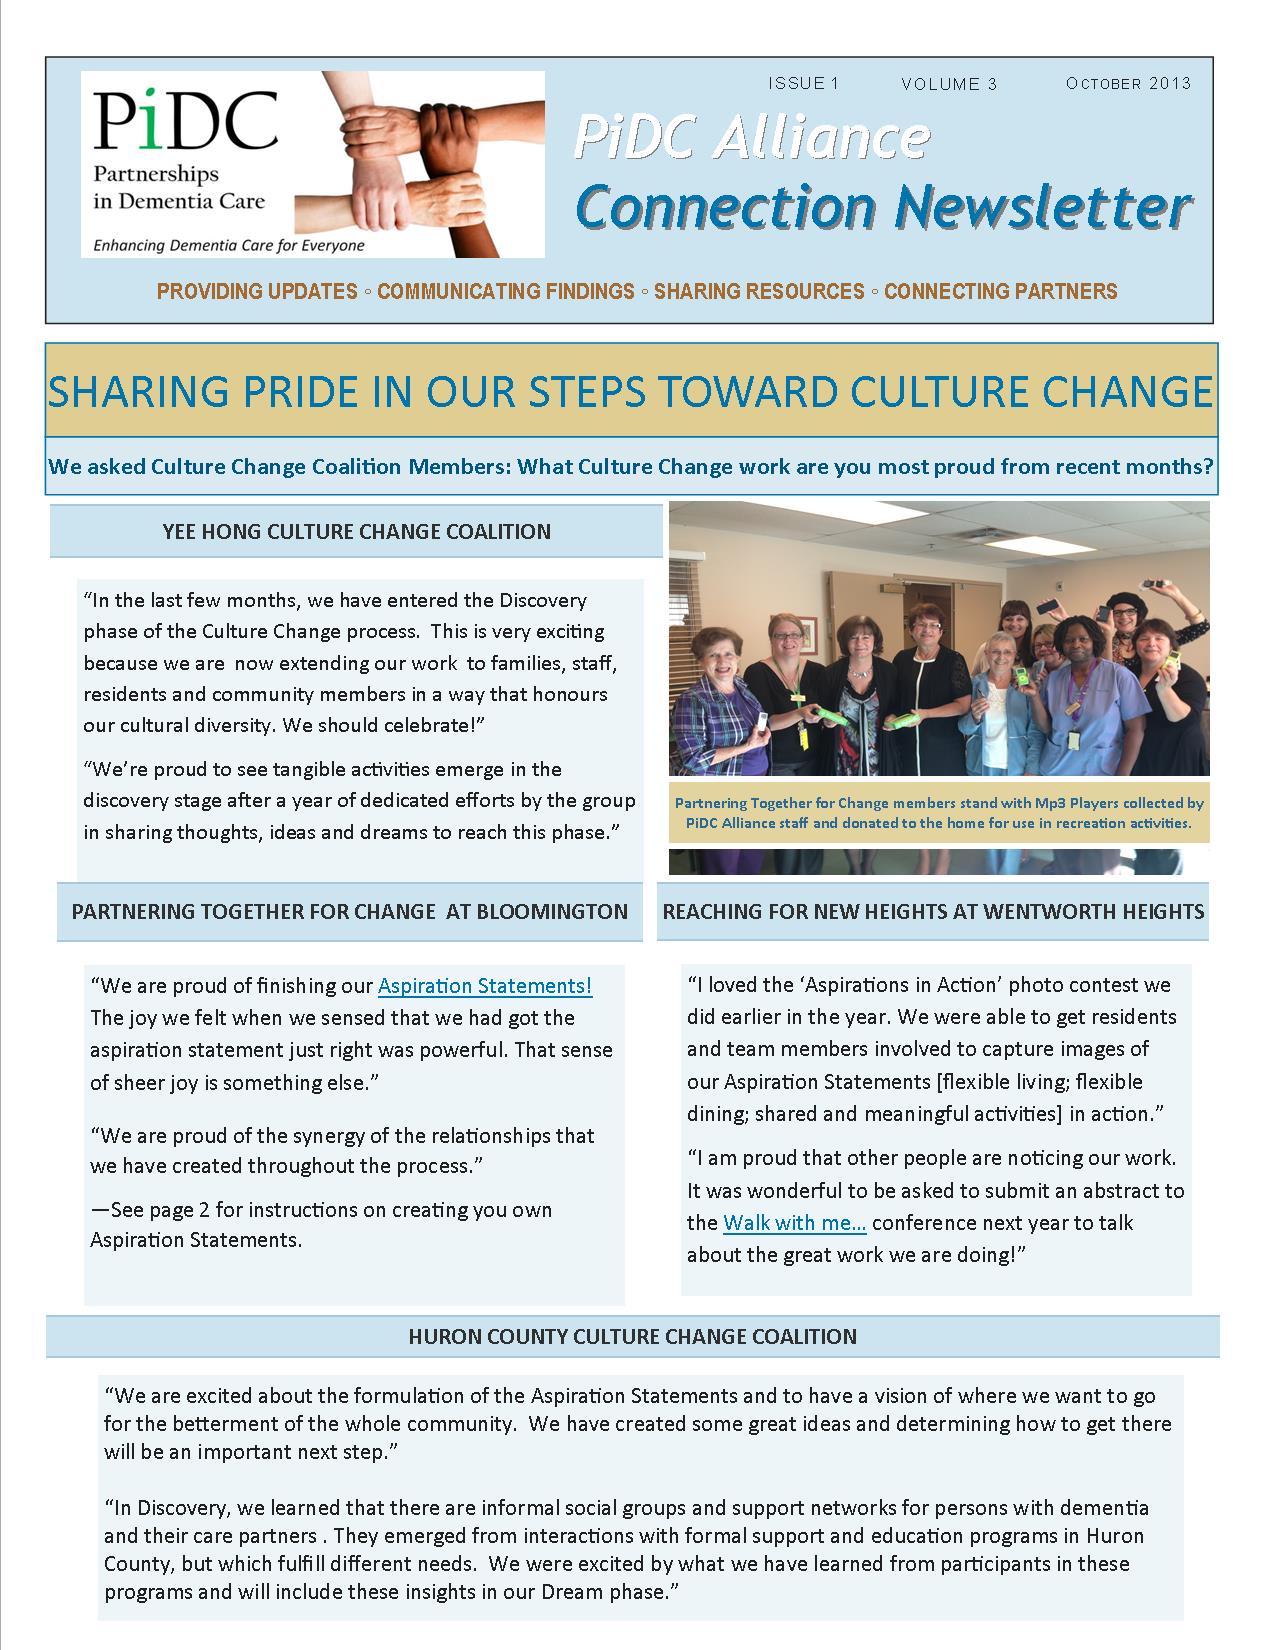 print copy of newsletter front page